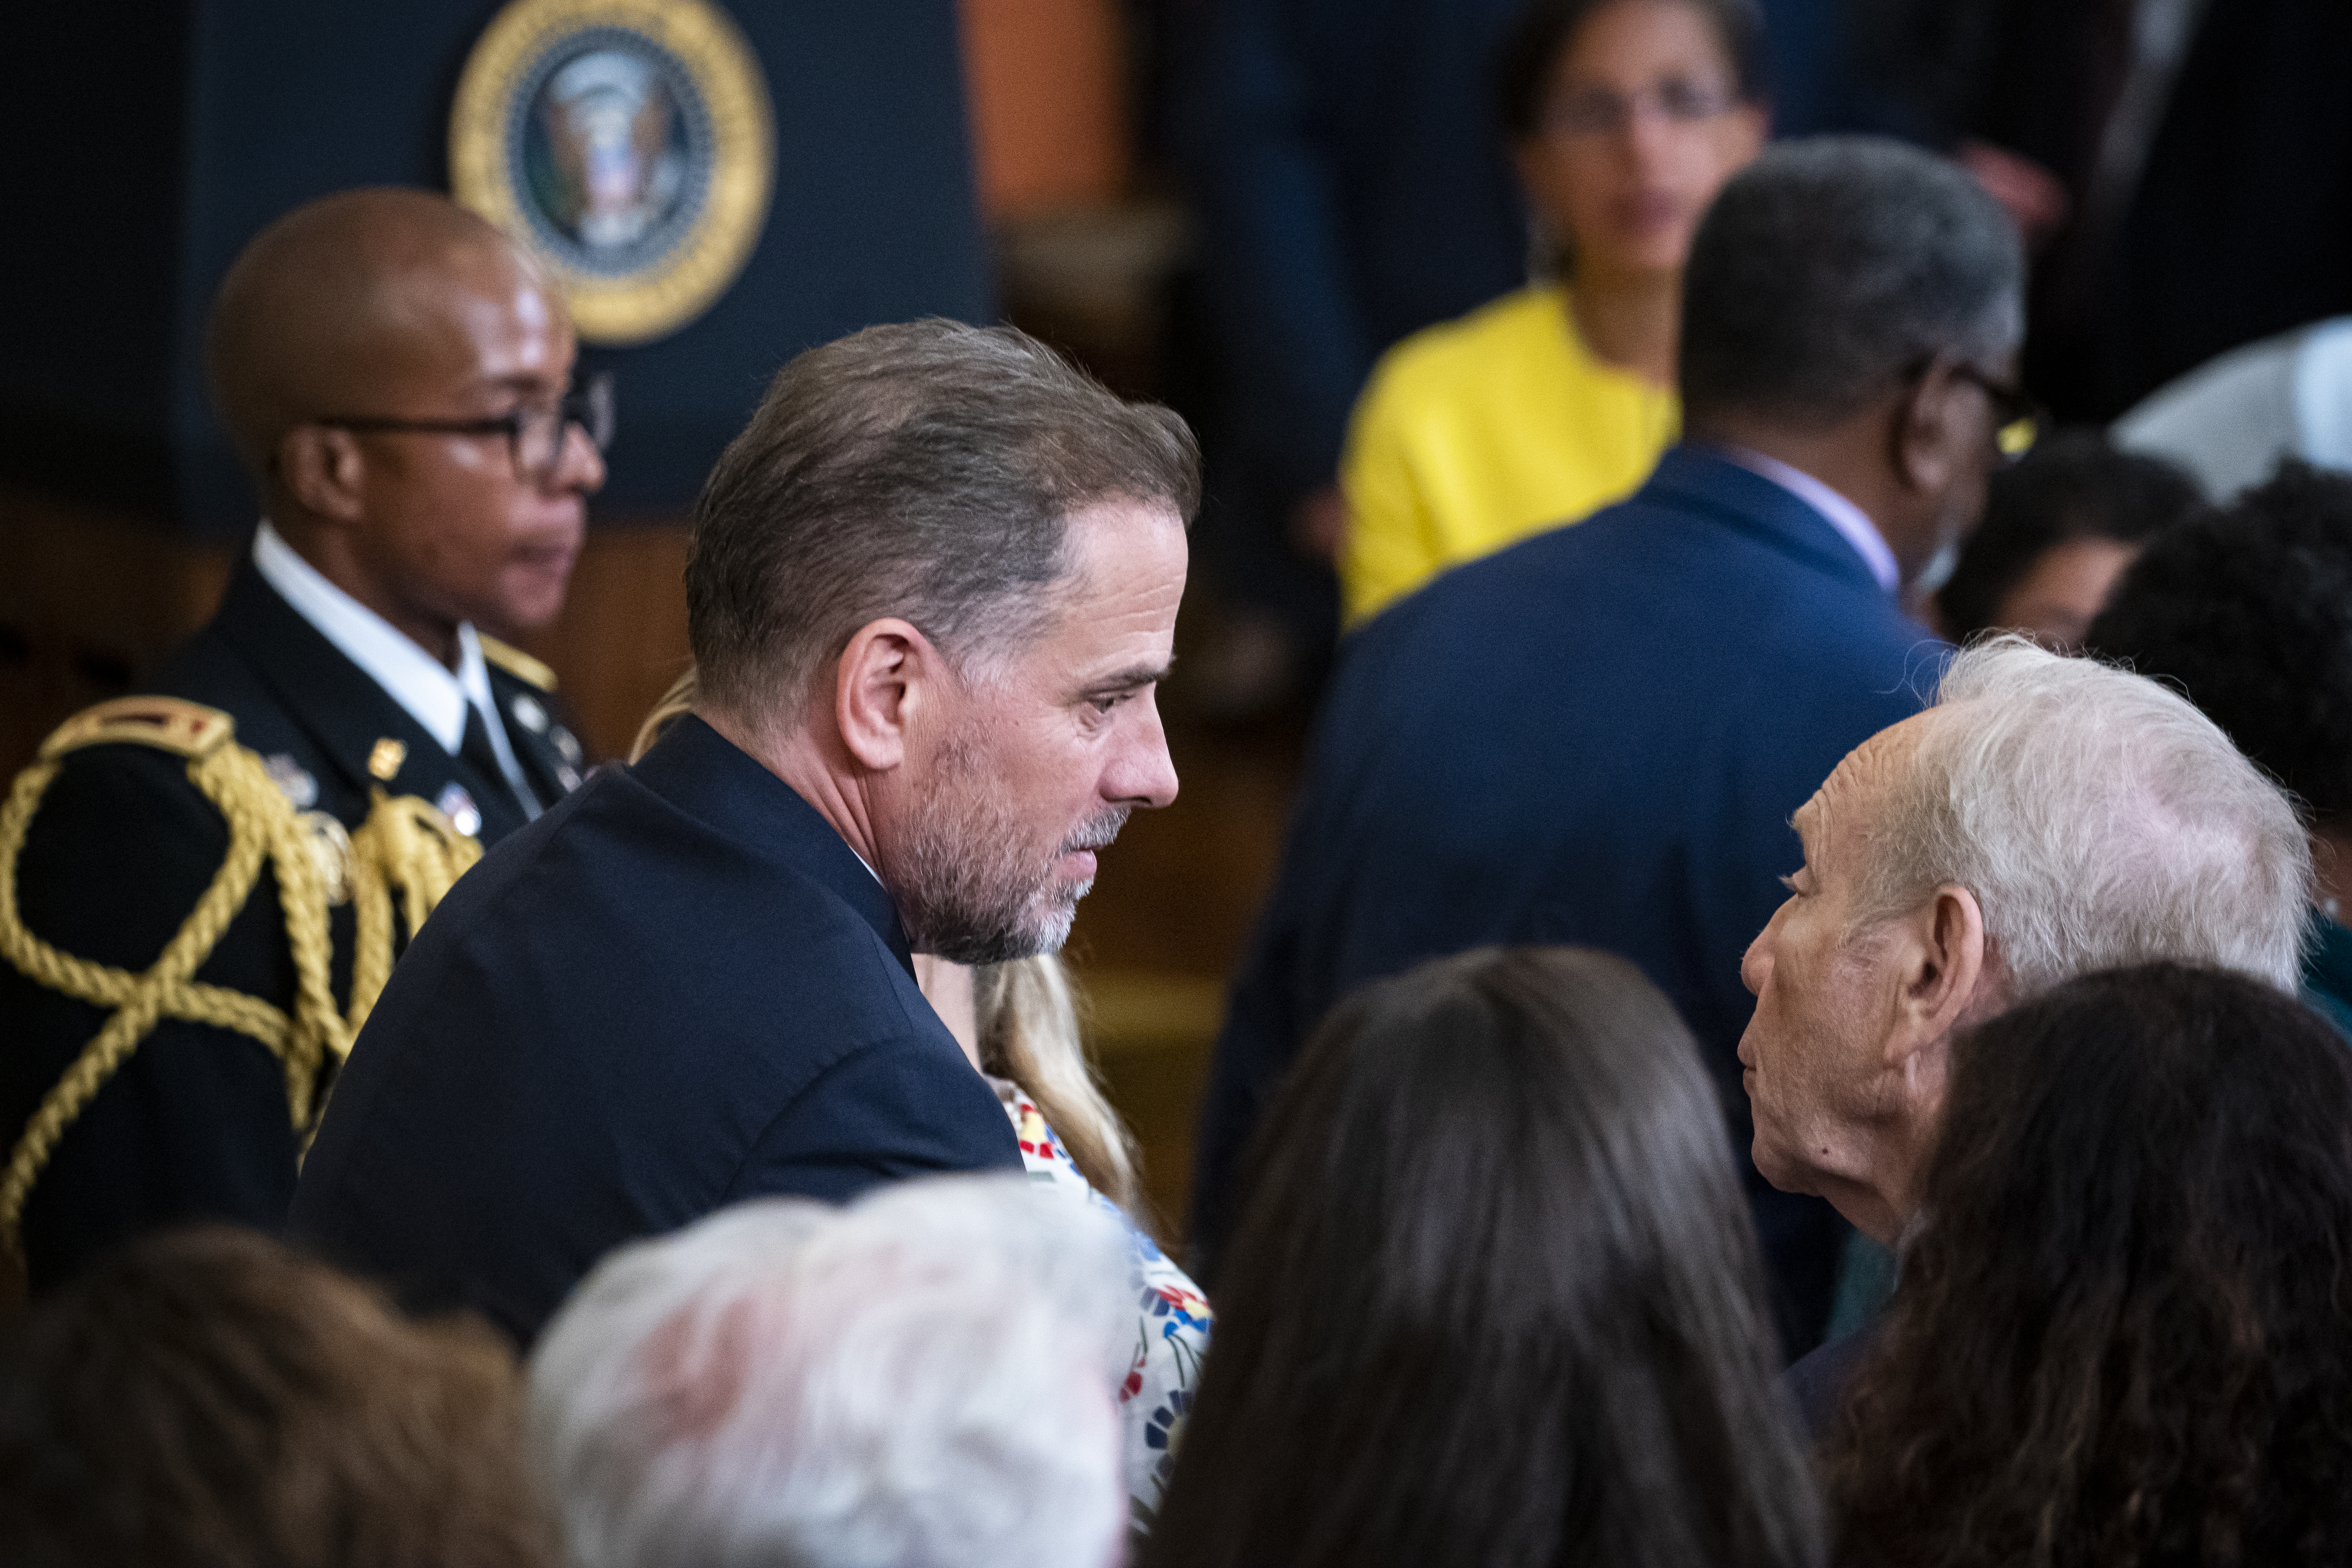 Hunter Biden attends a ceremony in the East Room of the White House on July 7, 2022.